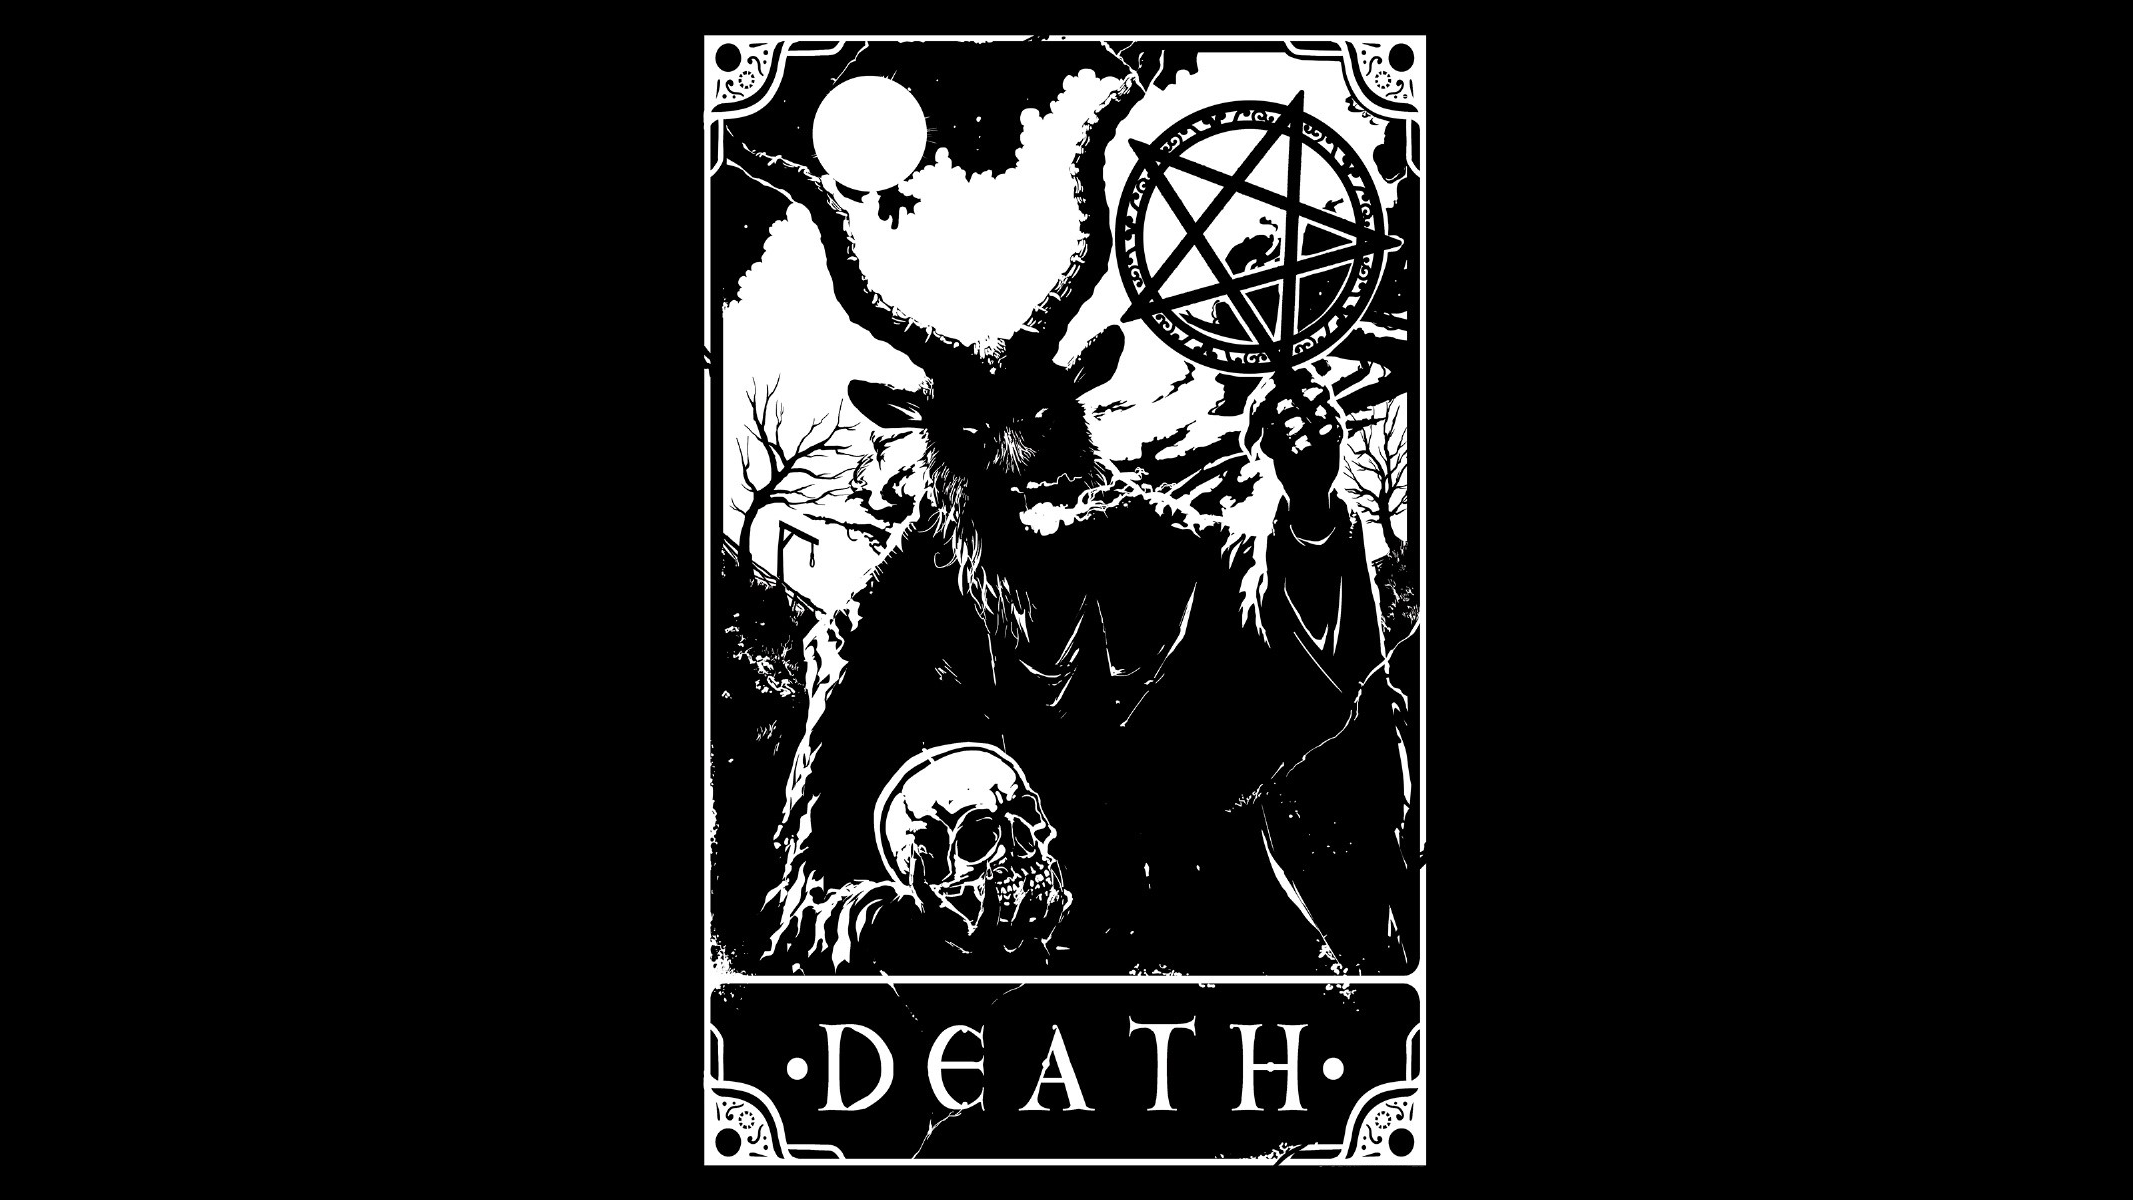 Monochrome Simple Background Occultism Tarot Goat Pentagram Skull Moon Gallows Text 2133x1200